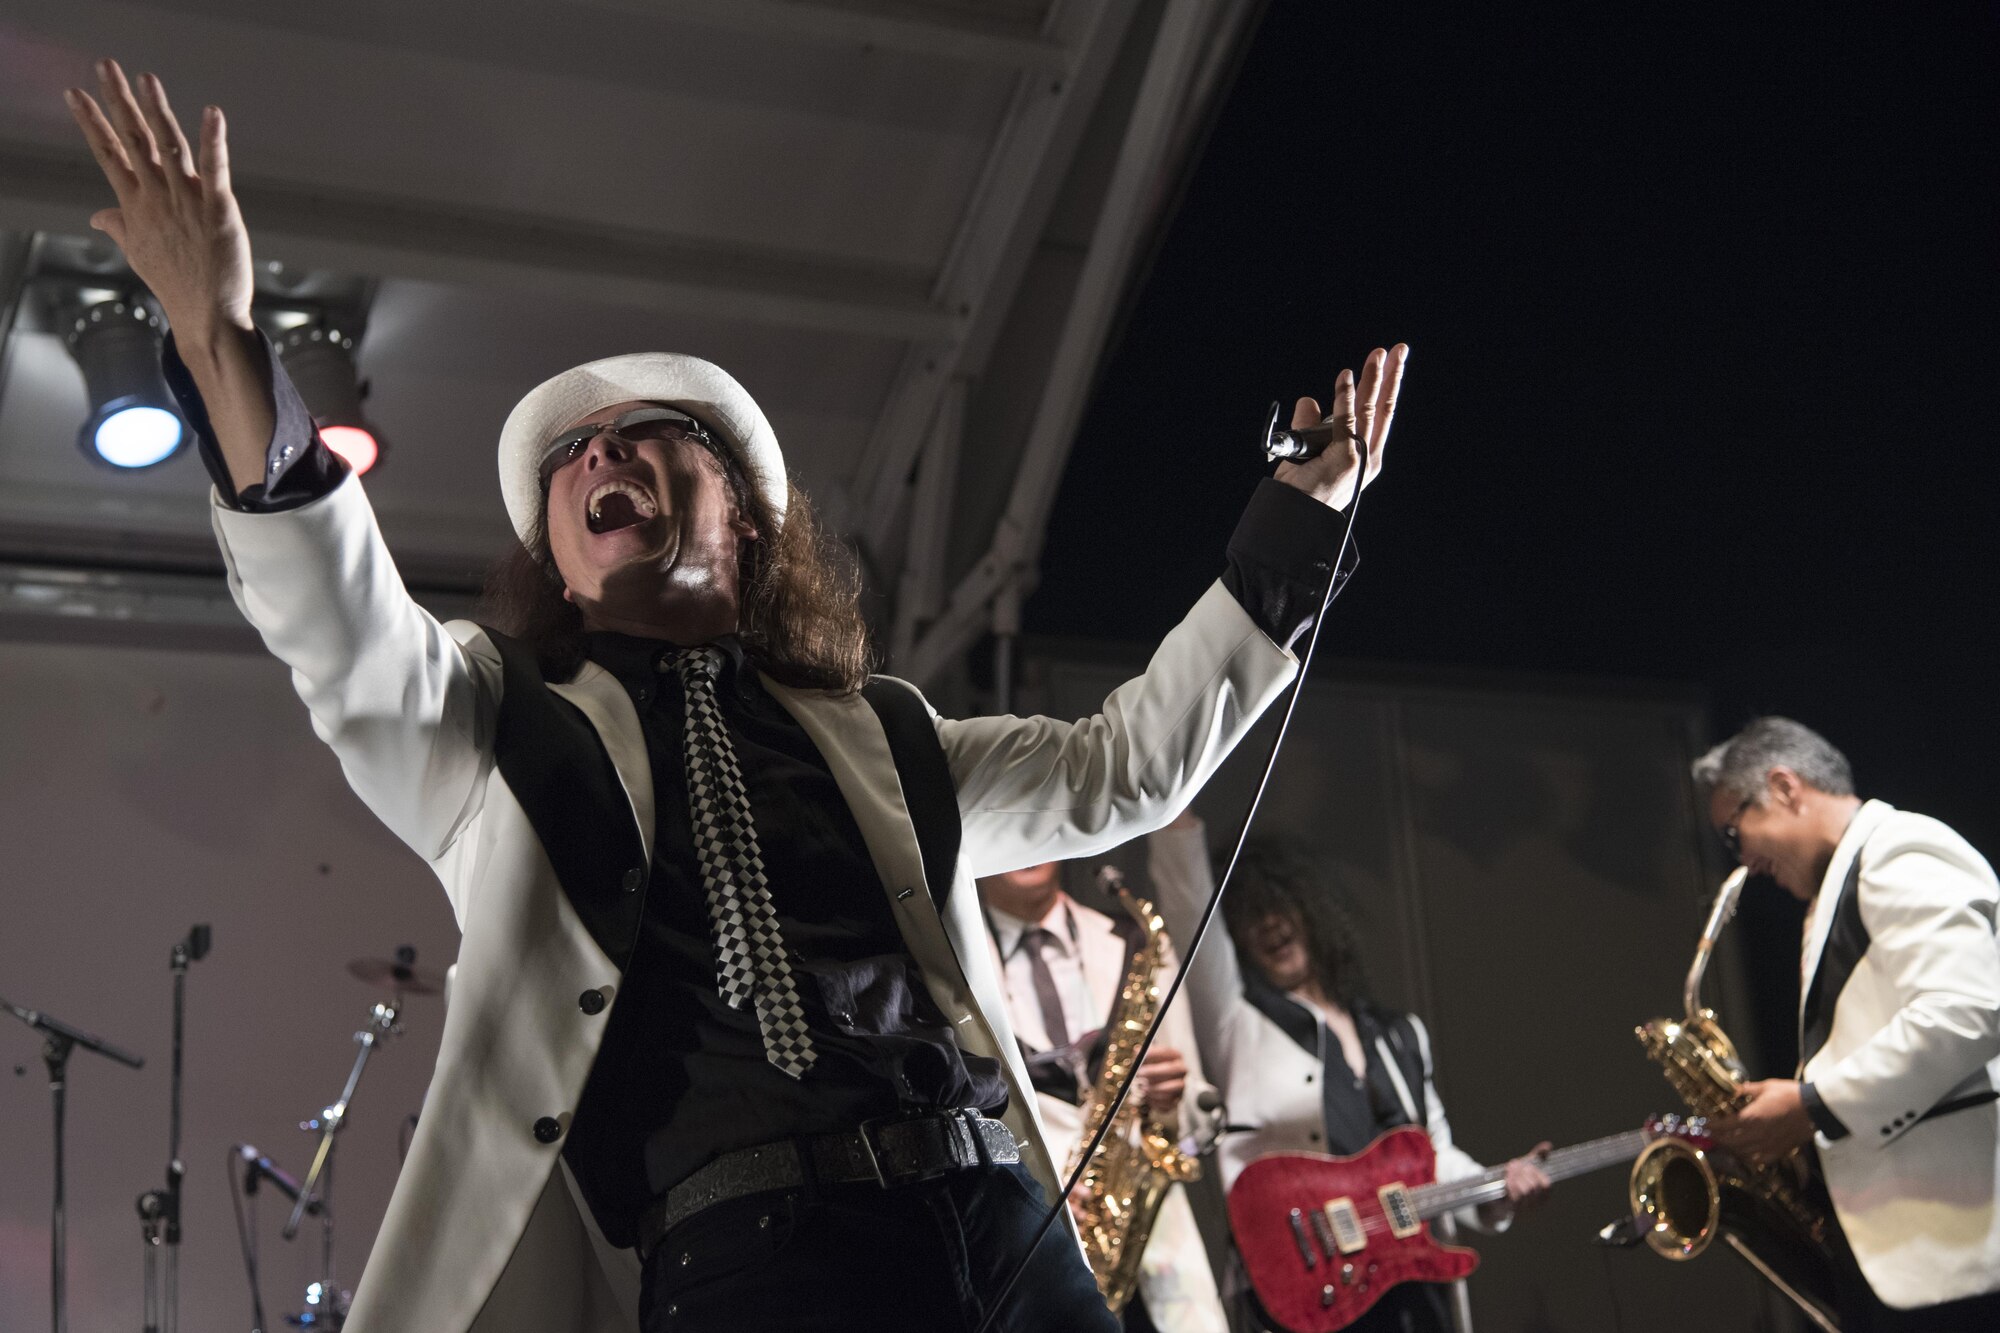 The lead singer of the ska band Eskalators sings to the crowd during the 2016 Friendship Festival at Yokota Air Base, Japan, Sept. 17, 2016. The two-day long festival is a chance to increase the bilateral relationship between the U.S. and Japan. (U.S. Air Force photo by Staff Sgt. Michael Washburn/Released)